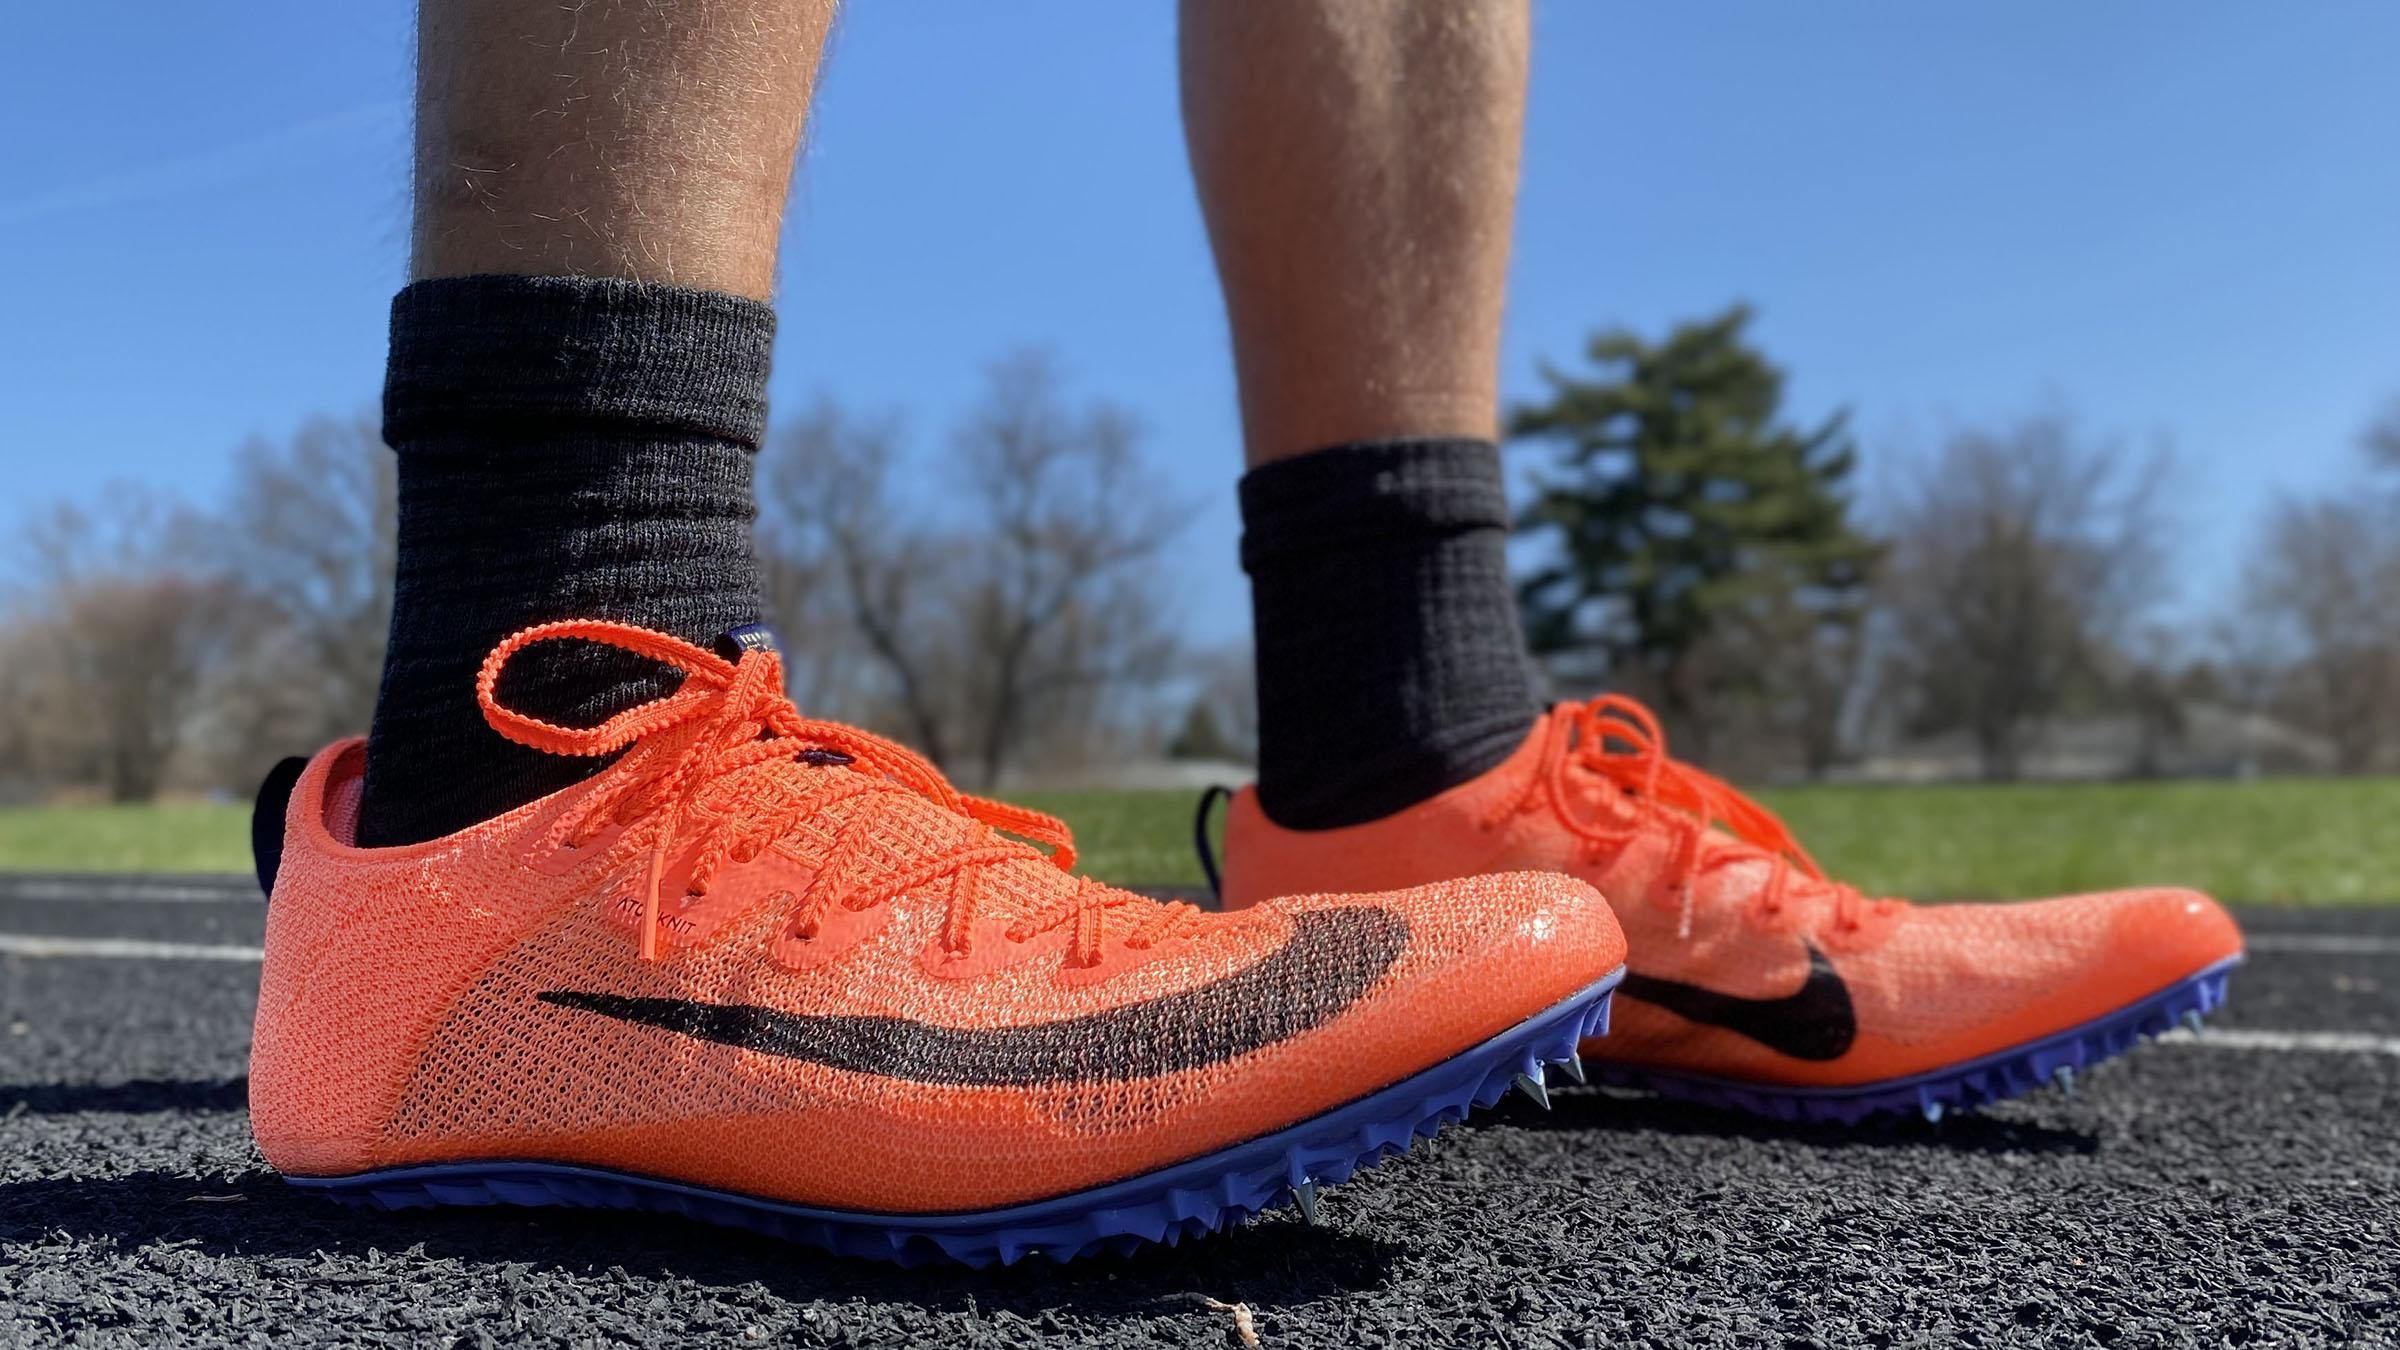 10 Best Sprinting Shoes in 2022